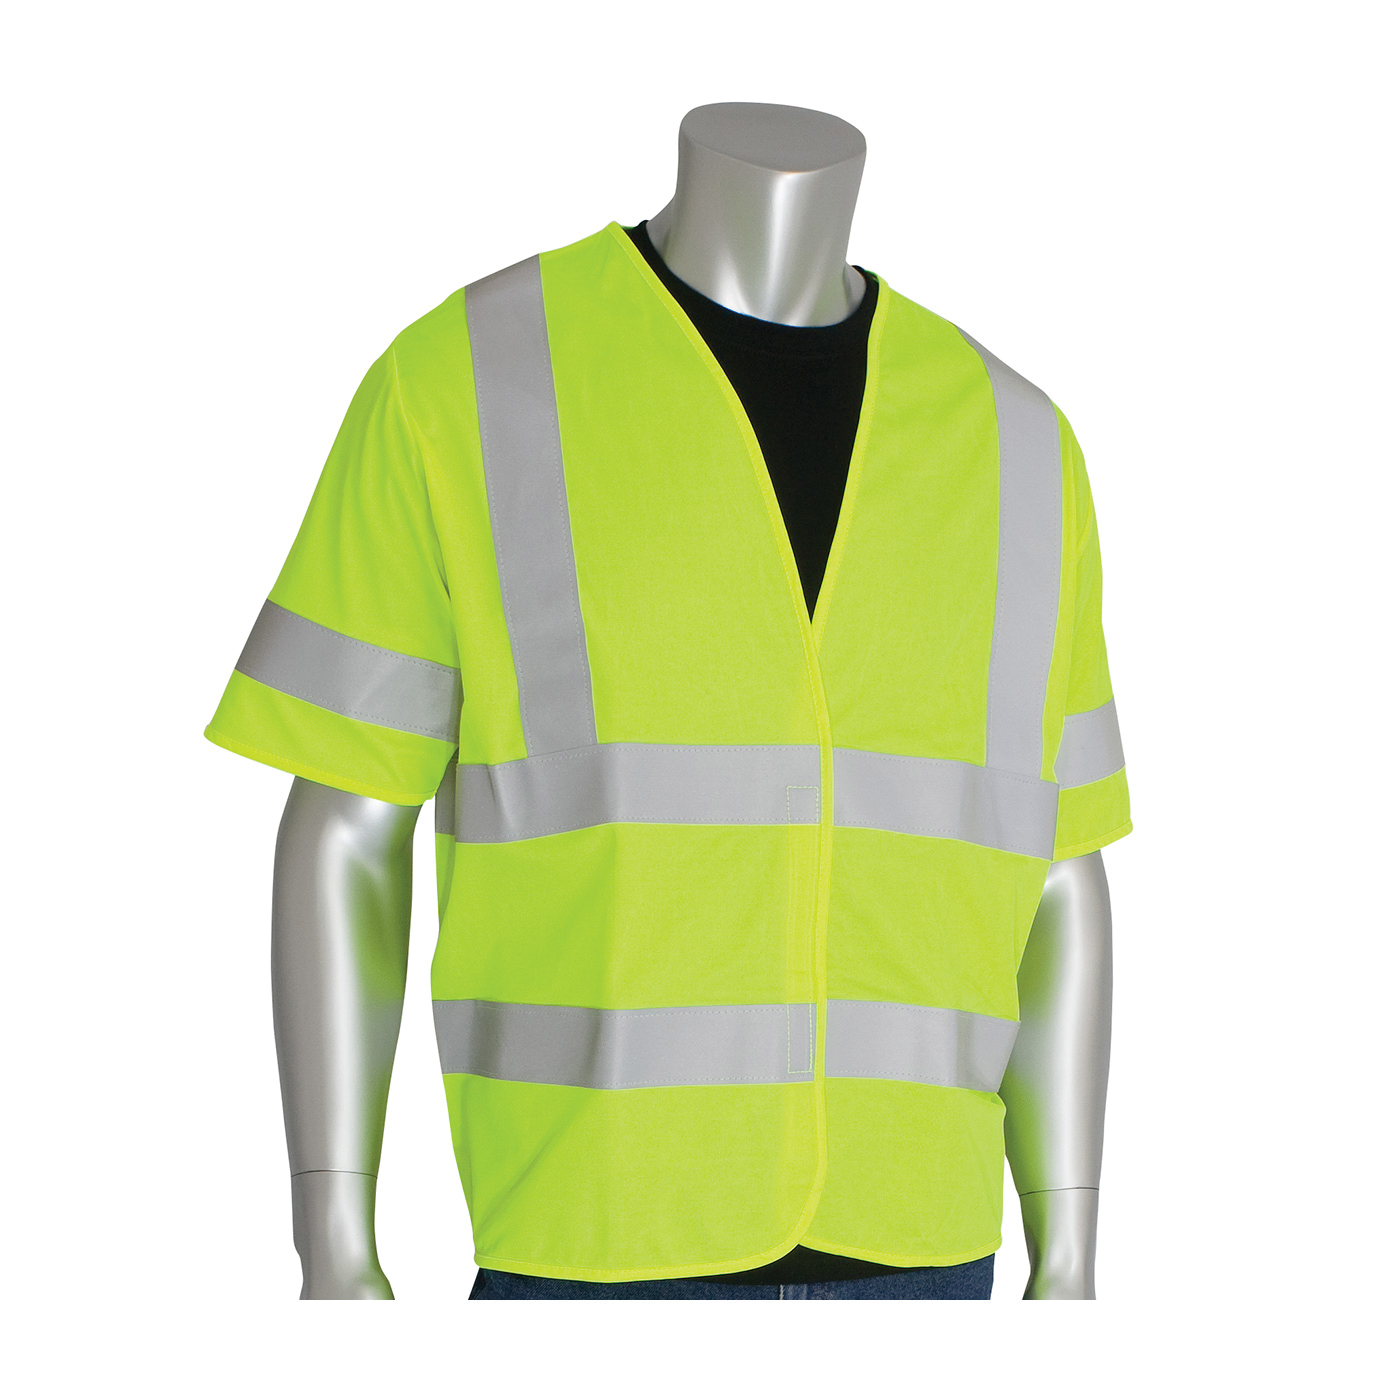 PIP® SafetyGear 305-HSSVFRLY-4X/5X FR Treated Standard Solid Vest, 4XL/5XL, Hi-Viz Yellow, Polyester, Hook and Loop Closure, ANSI Class: Class 3, Specifications Met: ANSI/ISEA 107